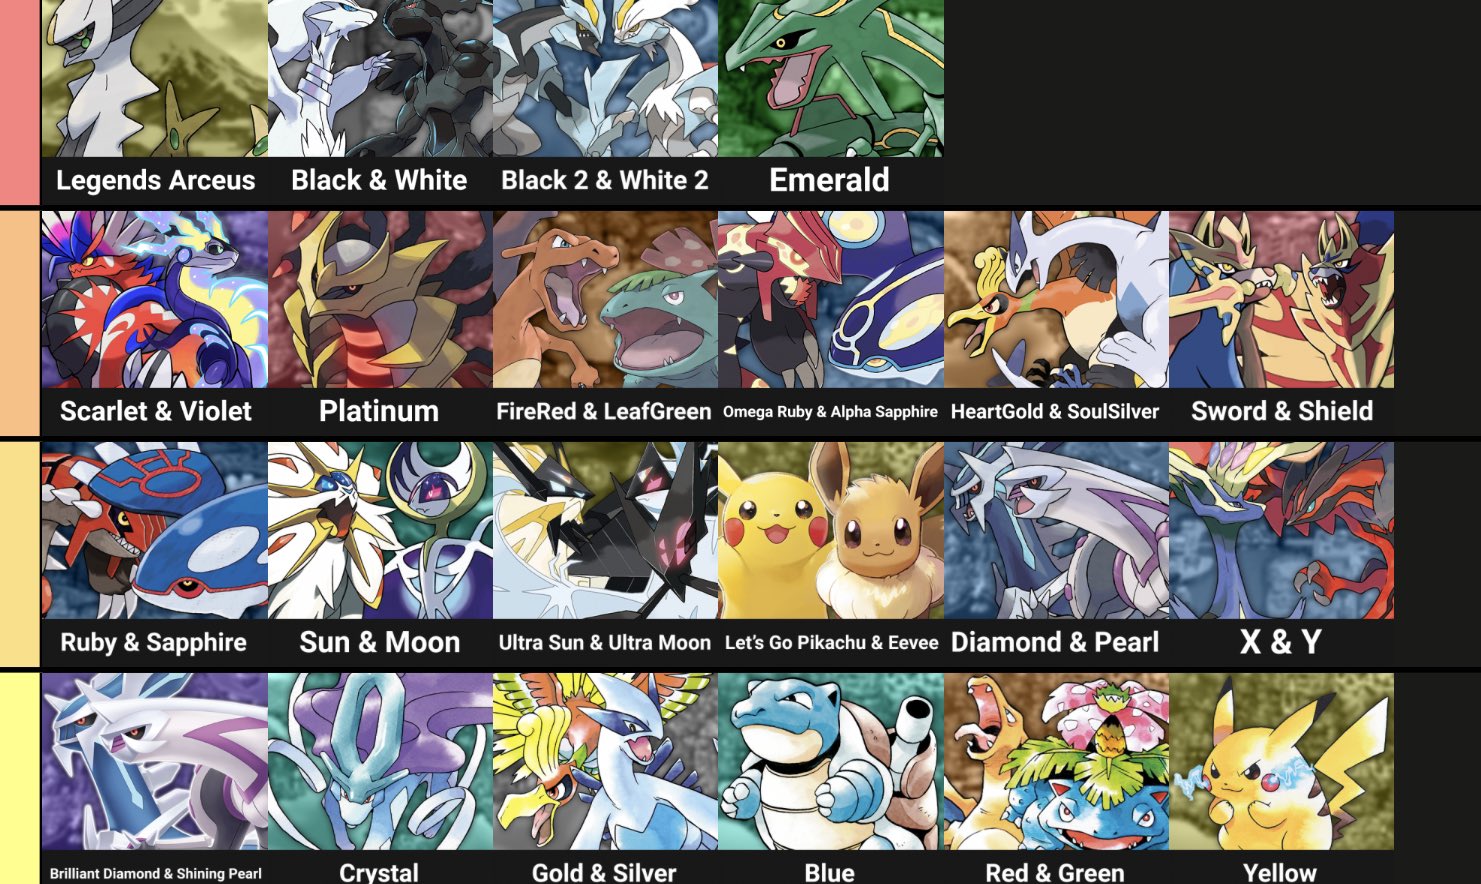 Pokemon Heartgold and Soulsilver In-Game Tier List (MkII)